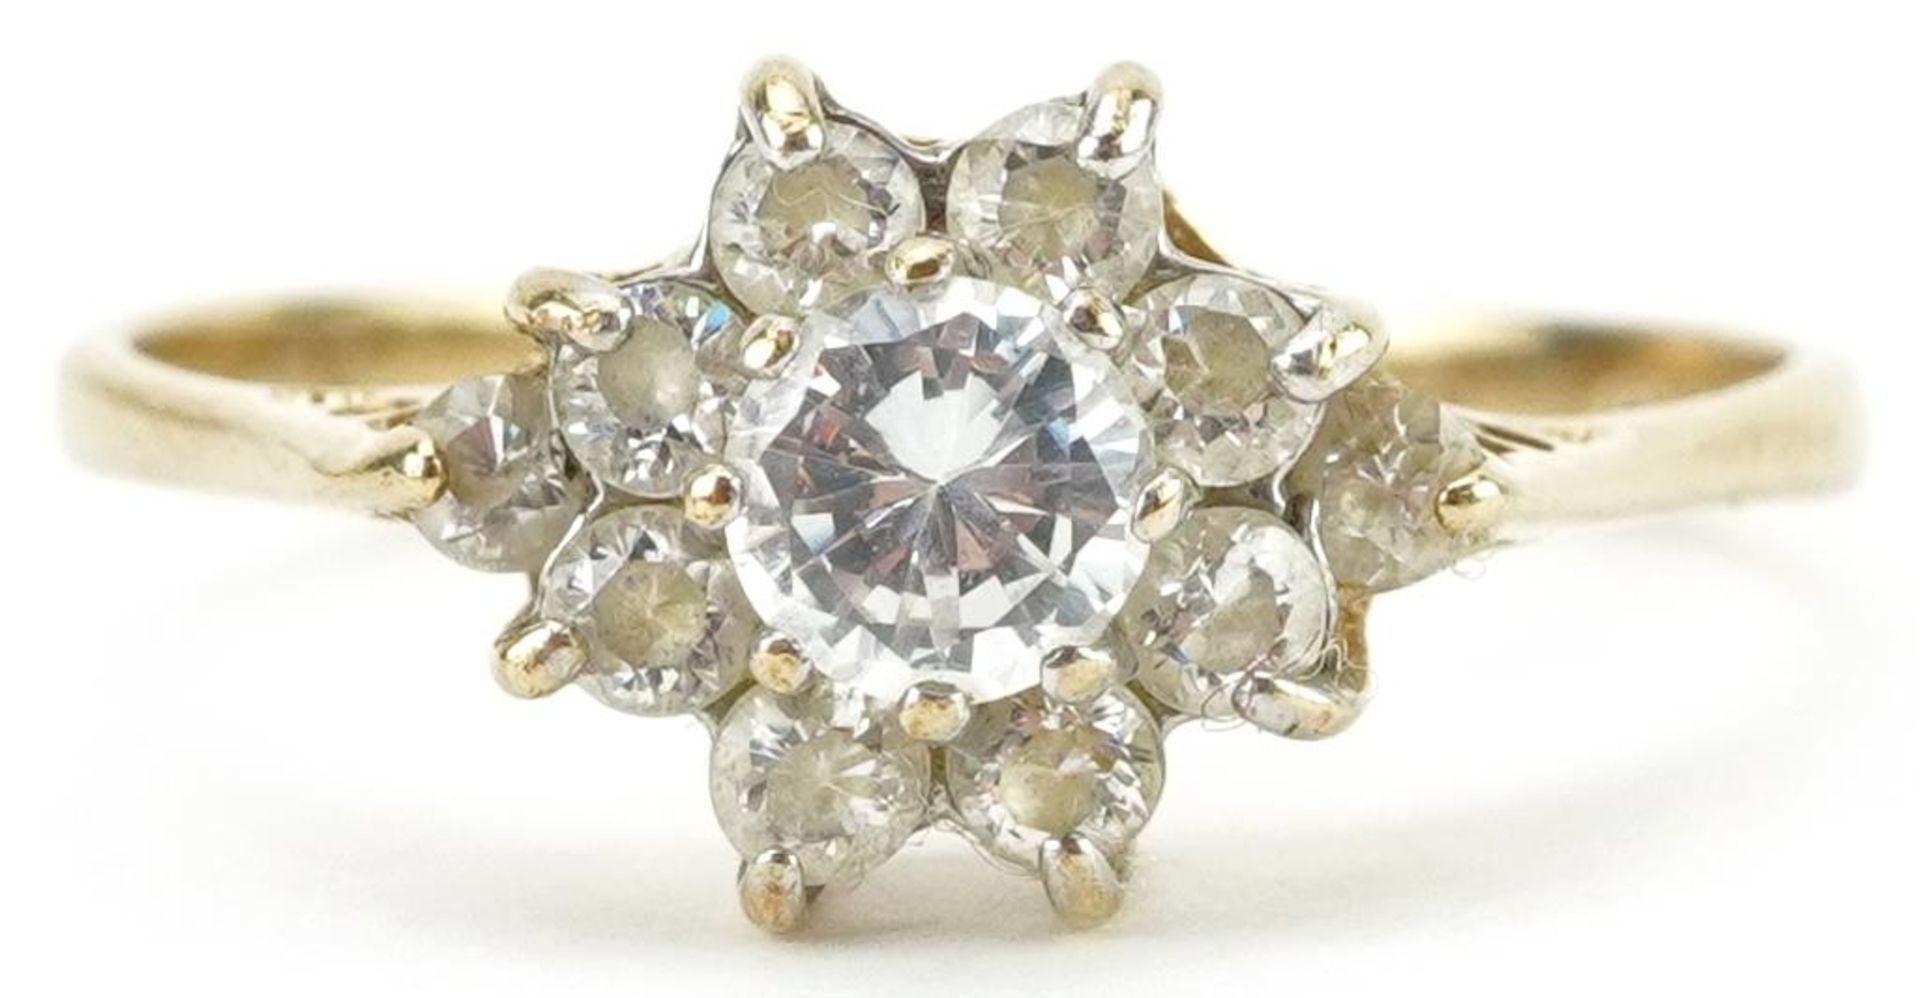 9ct gold cubic zirconia flower head ring with pierced setting, size L, 1.6g